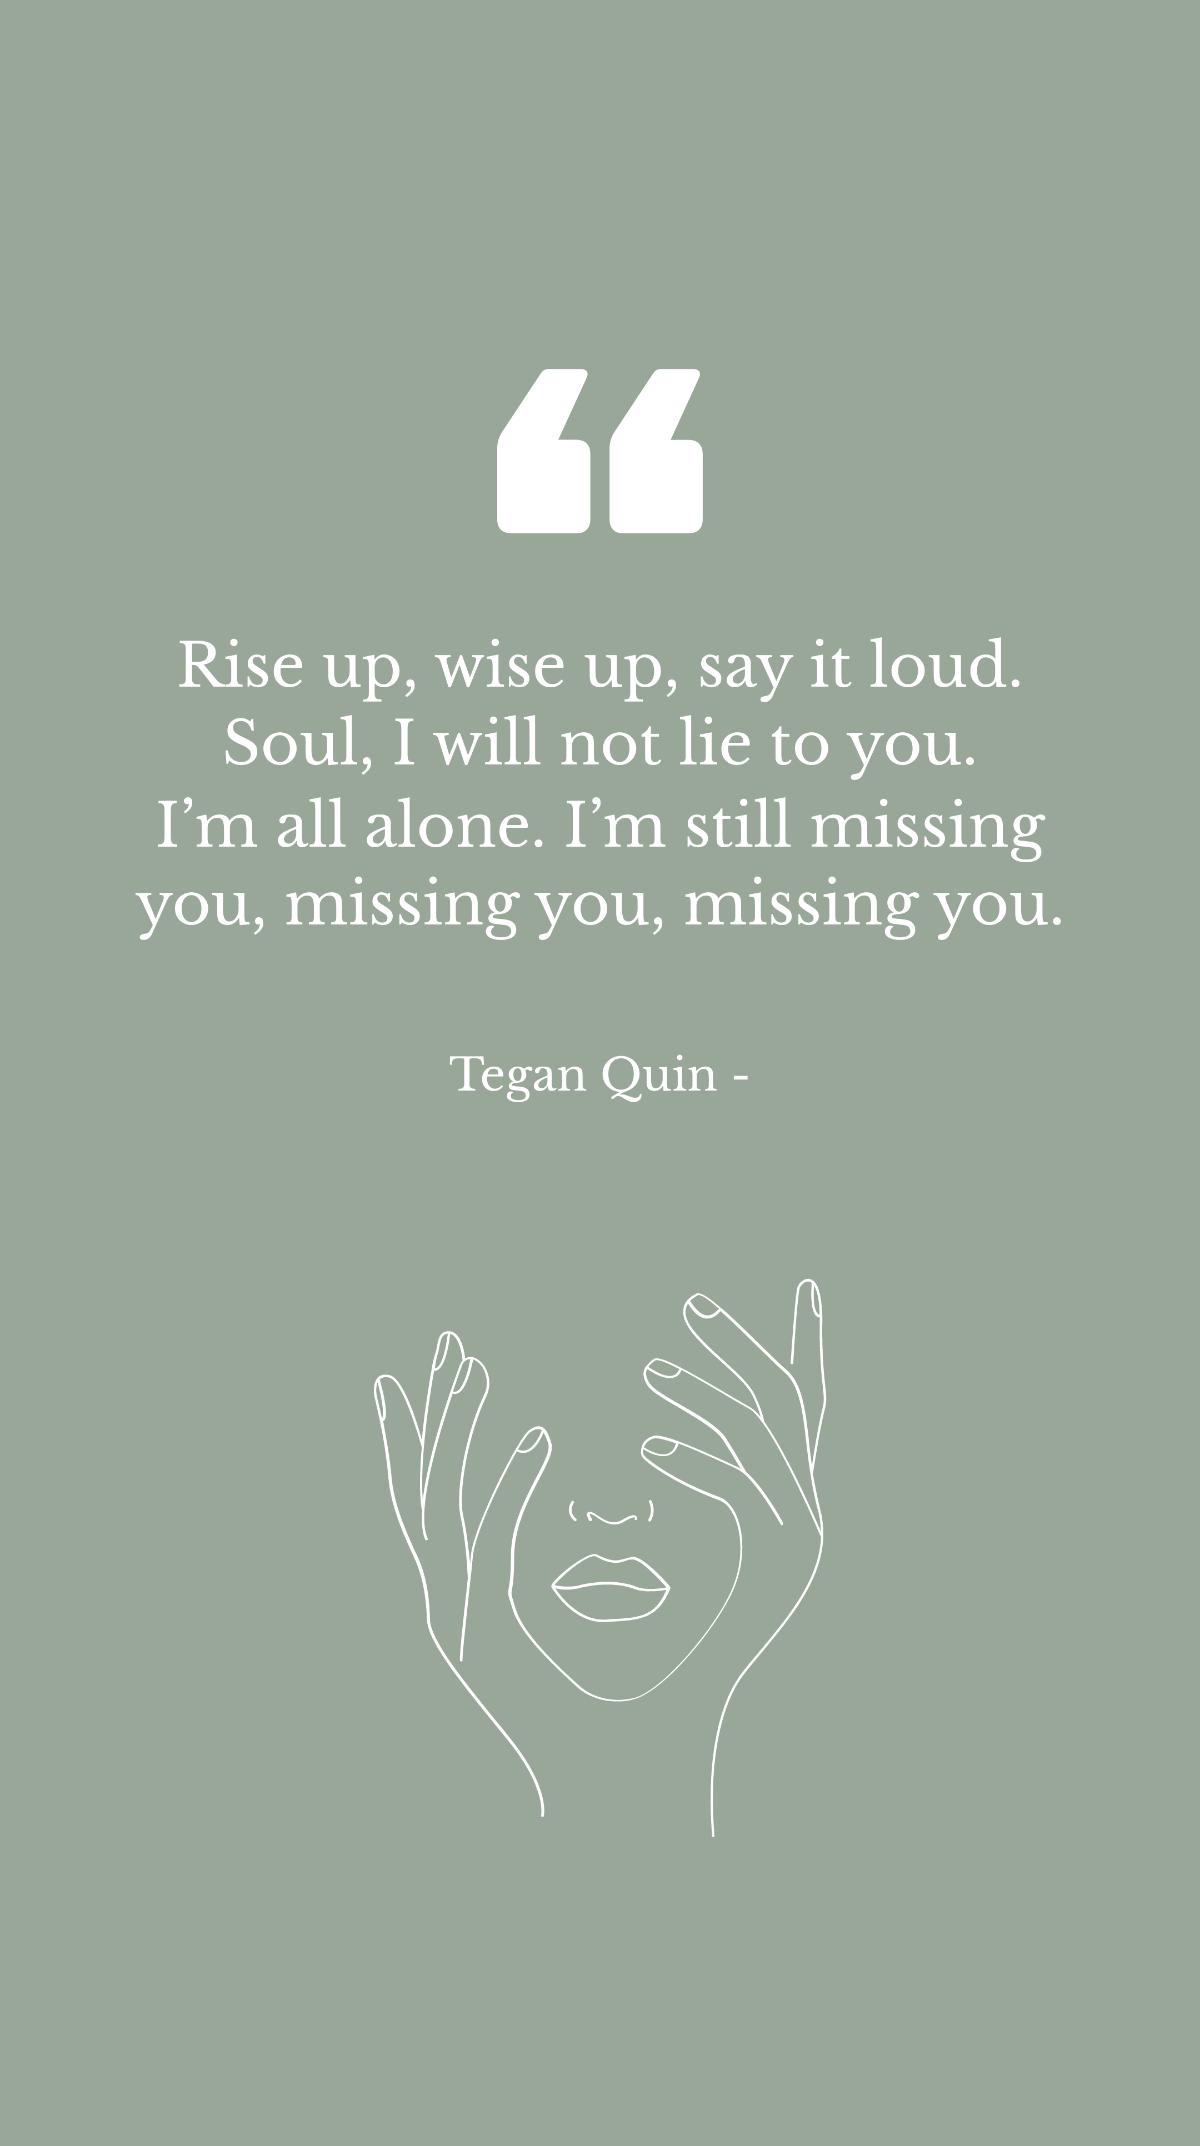 Tegan Quin - Rise up, wise up, say it loud. Soul, I will not lie to you. I’m all alone. I’m still missing you, missing you, missing you. Template